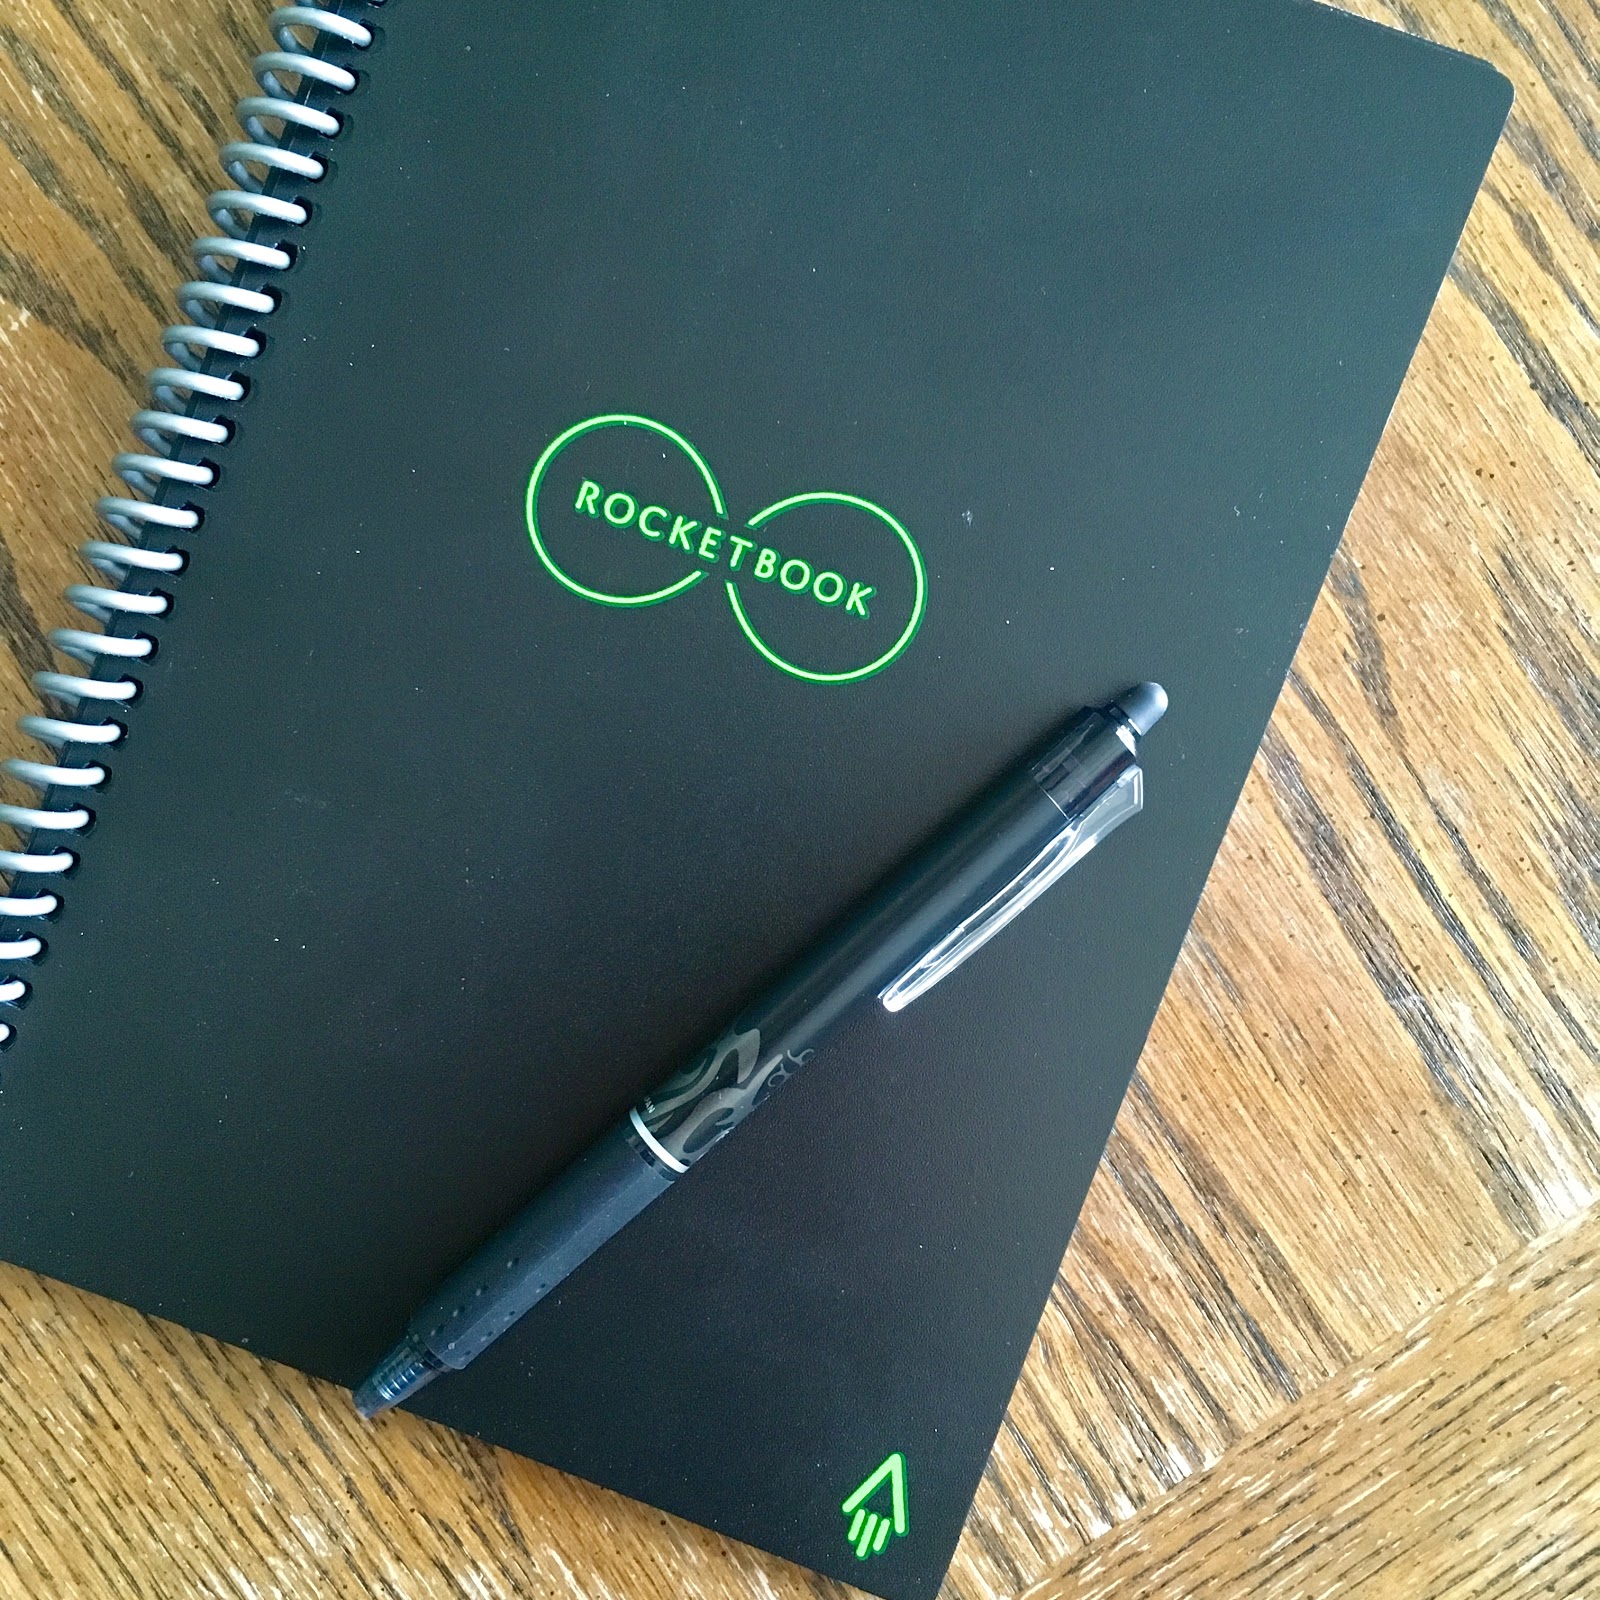 REVIEW: Rocketbook Everlast notebook proves useful to students – THE  ALGONQUIN HARBINGER